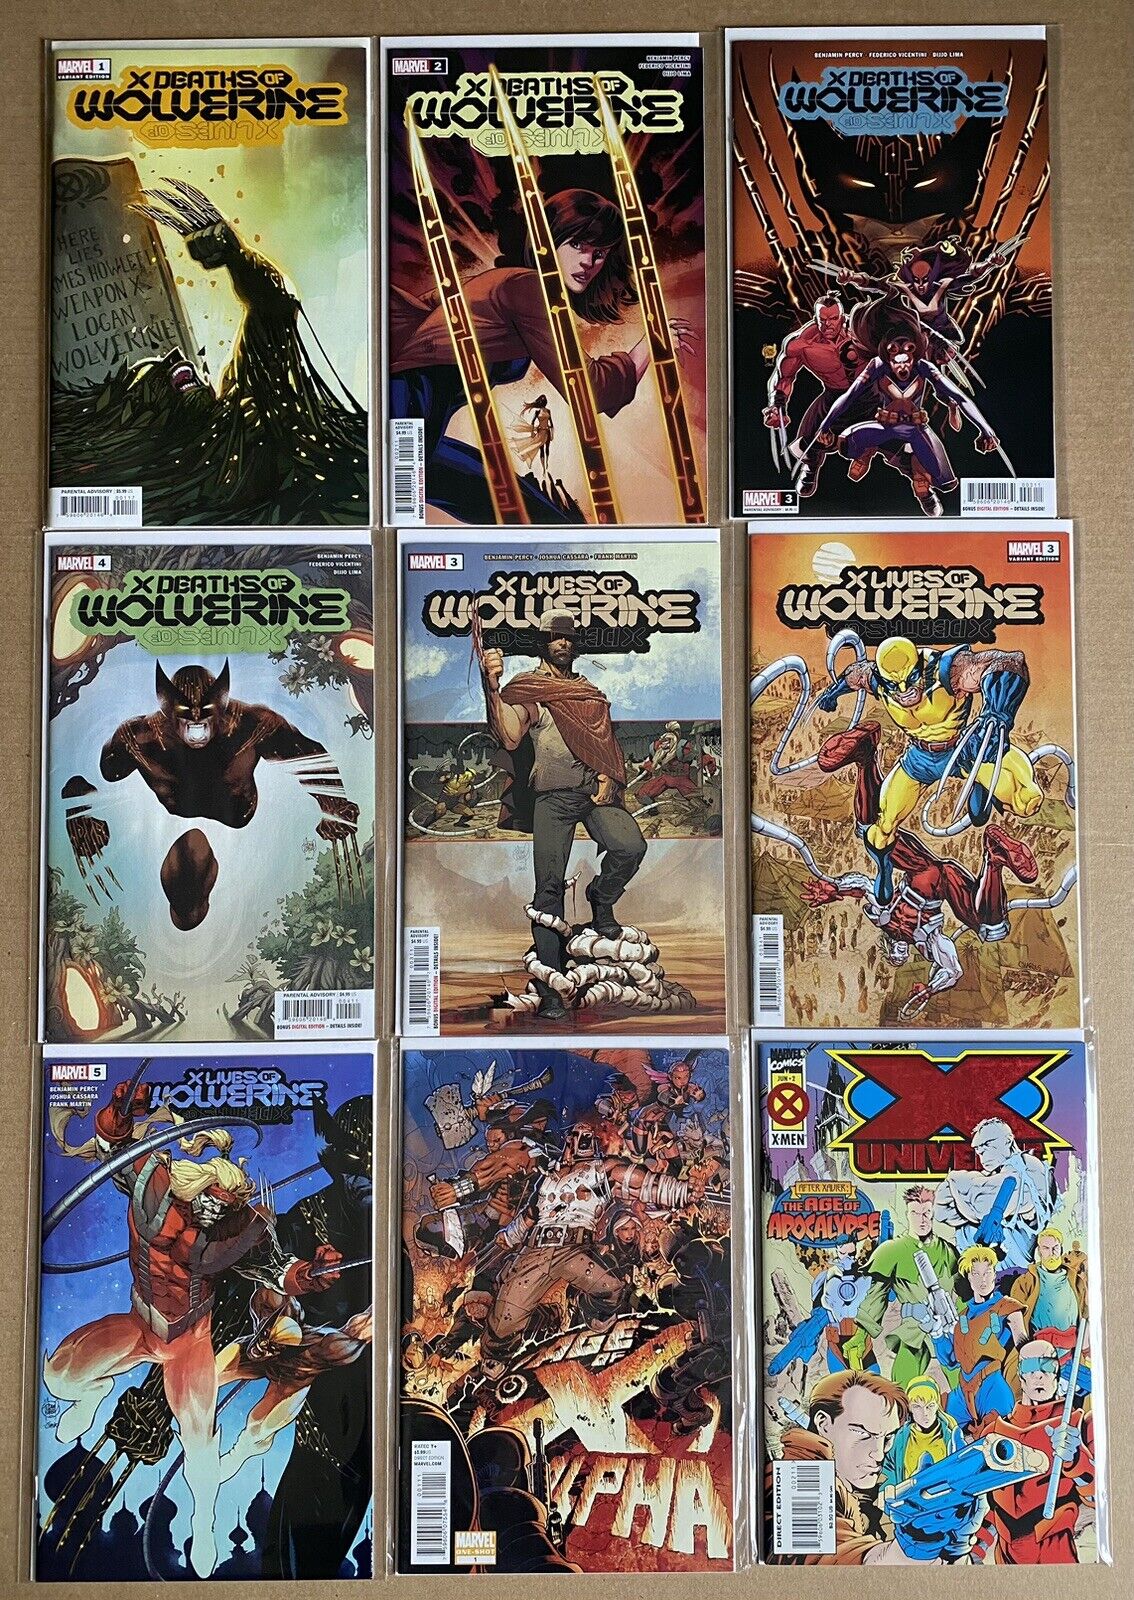 Lot of 9 Comic Books X Deaths of Wolverine #1 Variant 2 3 4 Lives #3 Variant 3 5